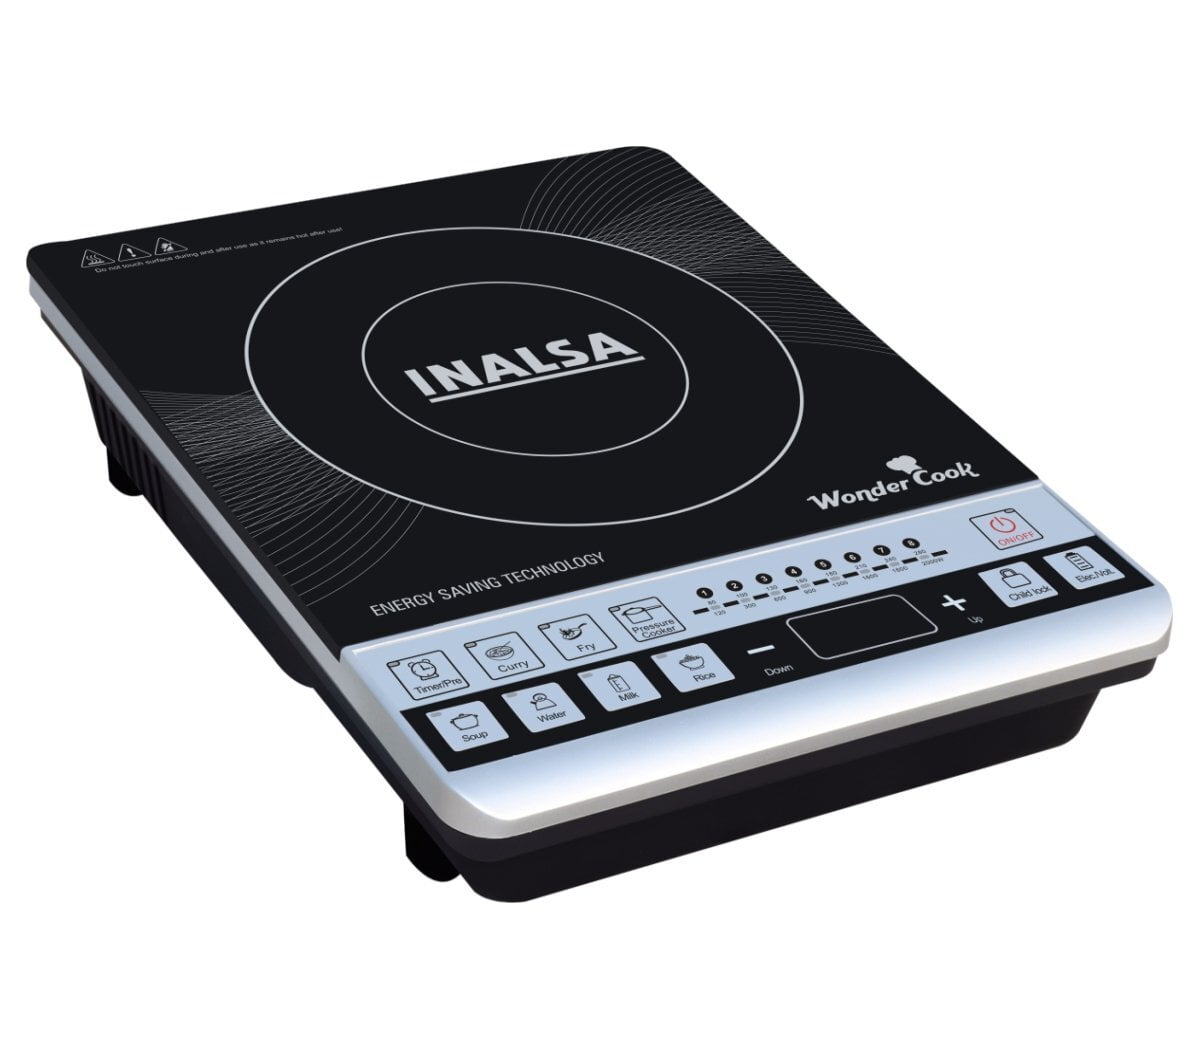 Inalsa Wonder Cook Induction Cooktop On Dillimall.Com